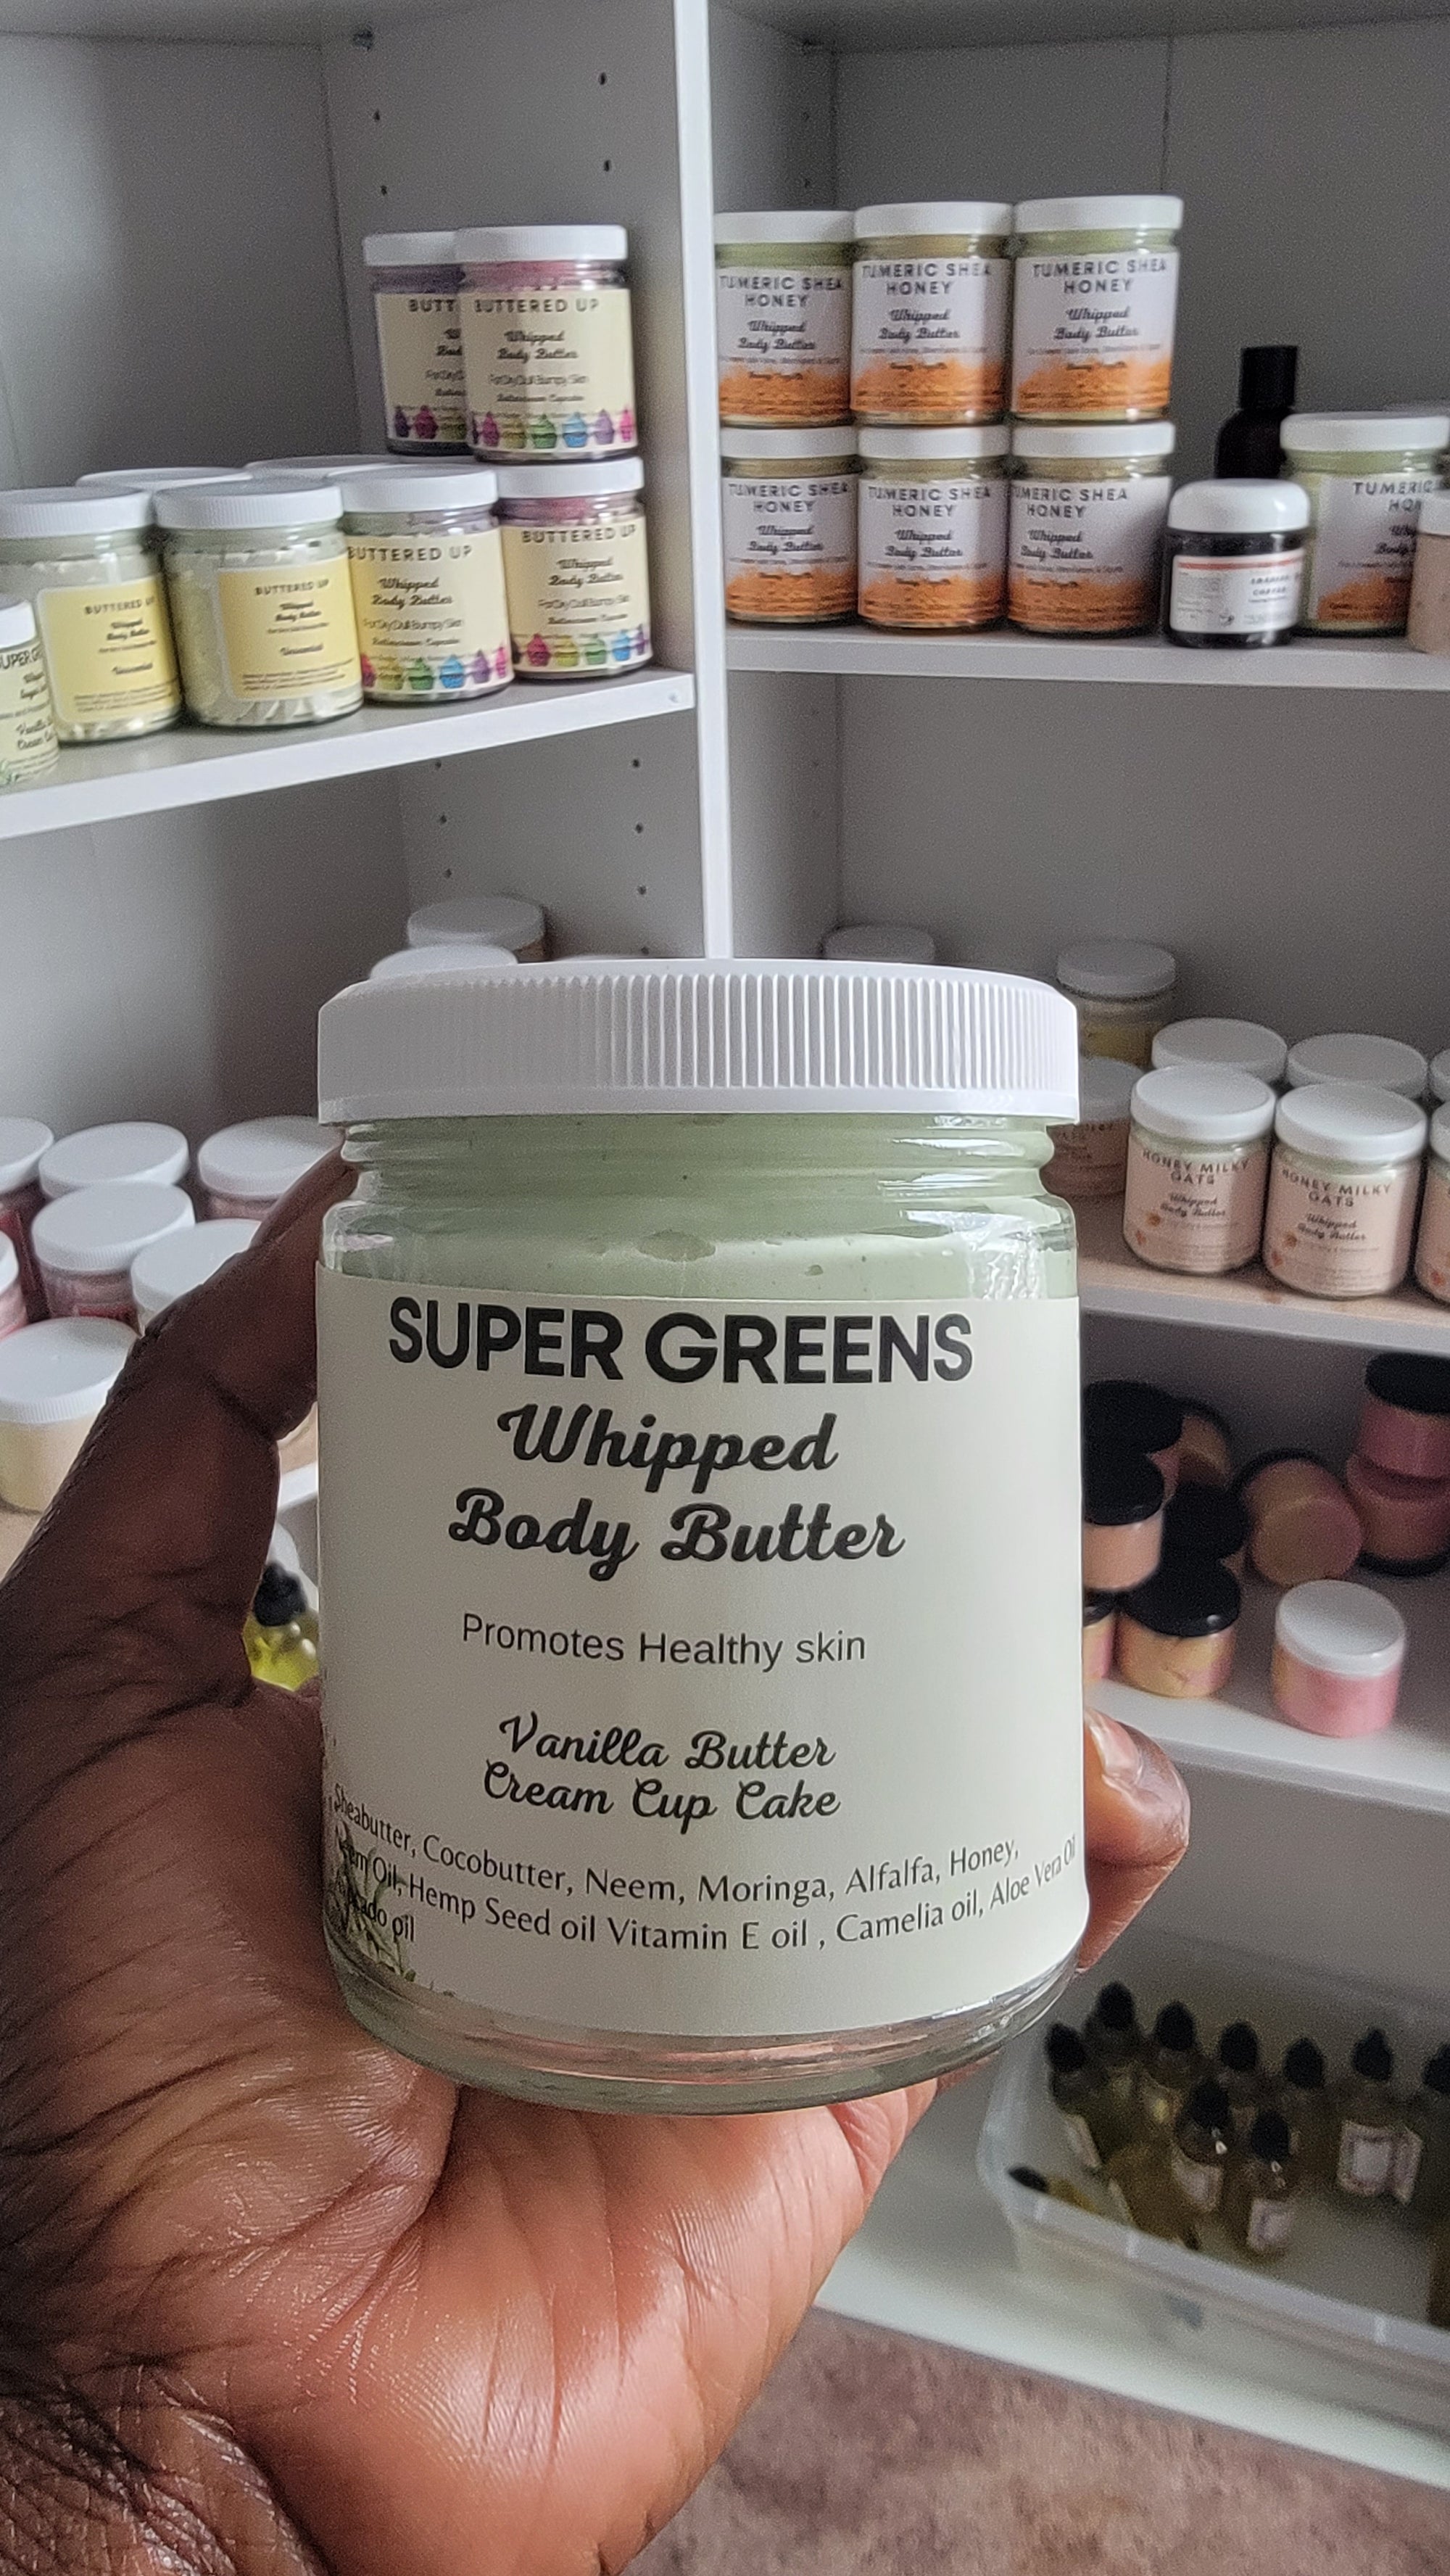 Super Greens Whipped Body Butter- Vanilla Butter Cream Cup Cake Scented. 9 oz